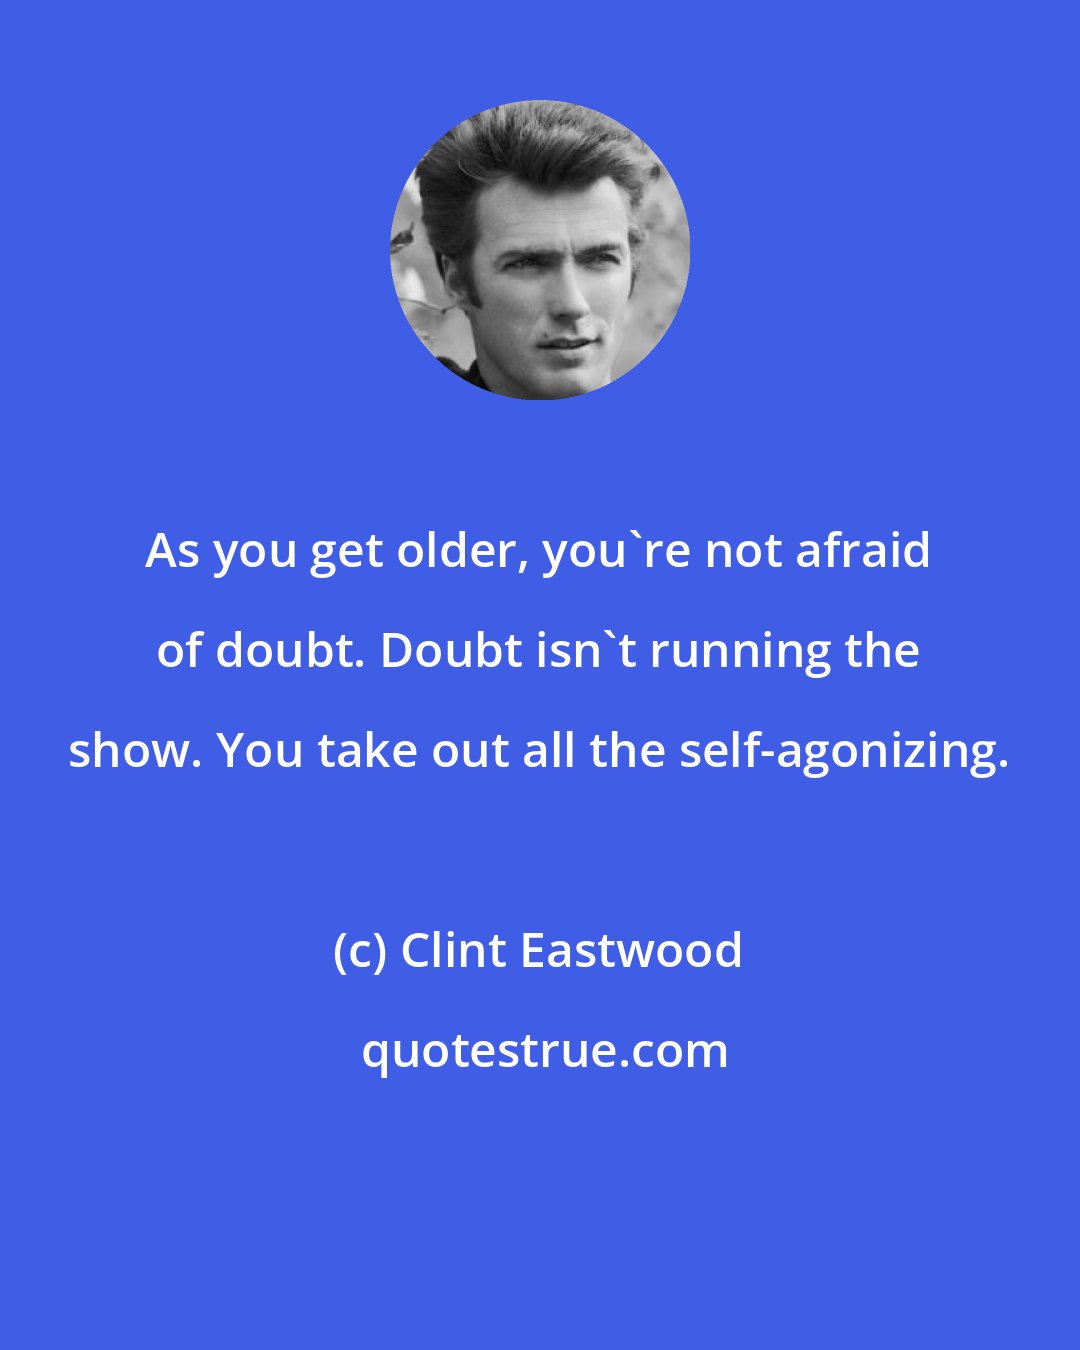 Clint Eastwood: As you get older, you're not afraid of doubt. Doubt isn't running the show. You take out all the self-agonizing.